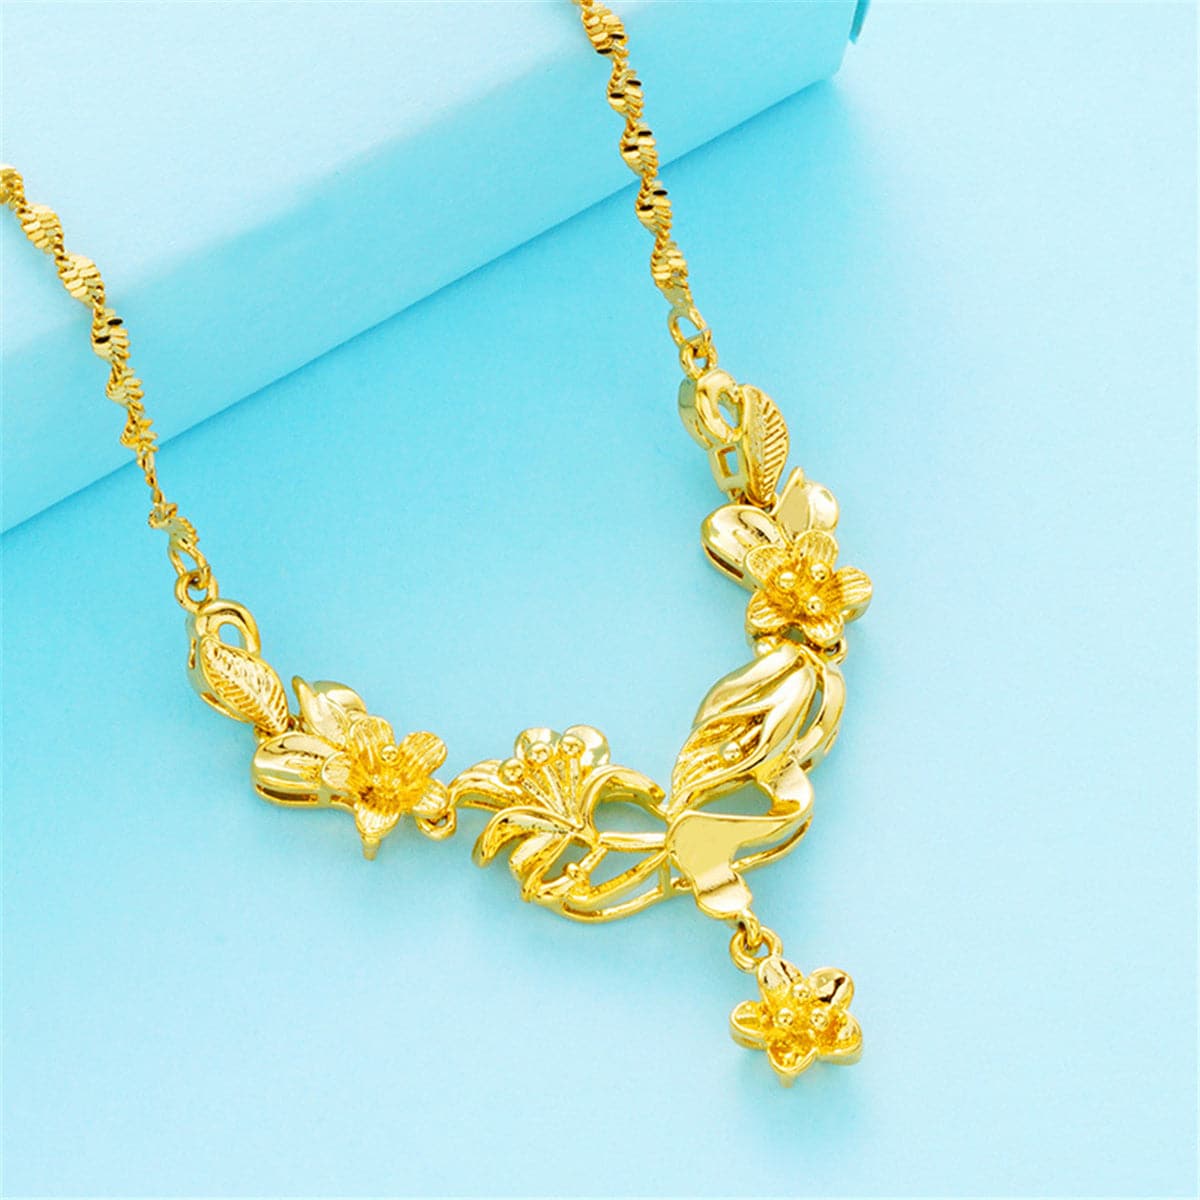 18K Gold-Plated Flower Statement Necklace